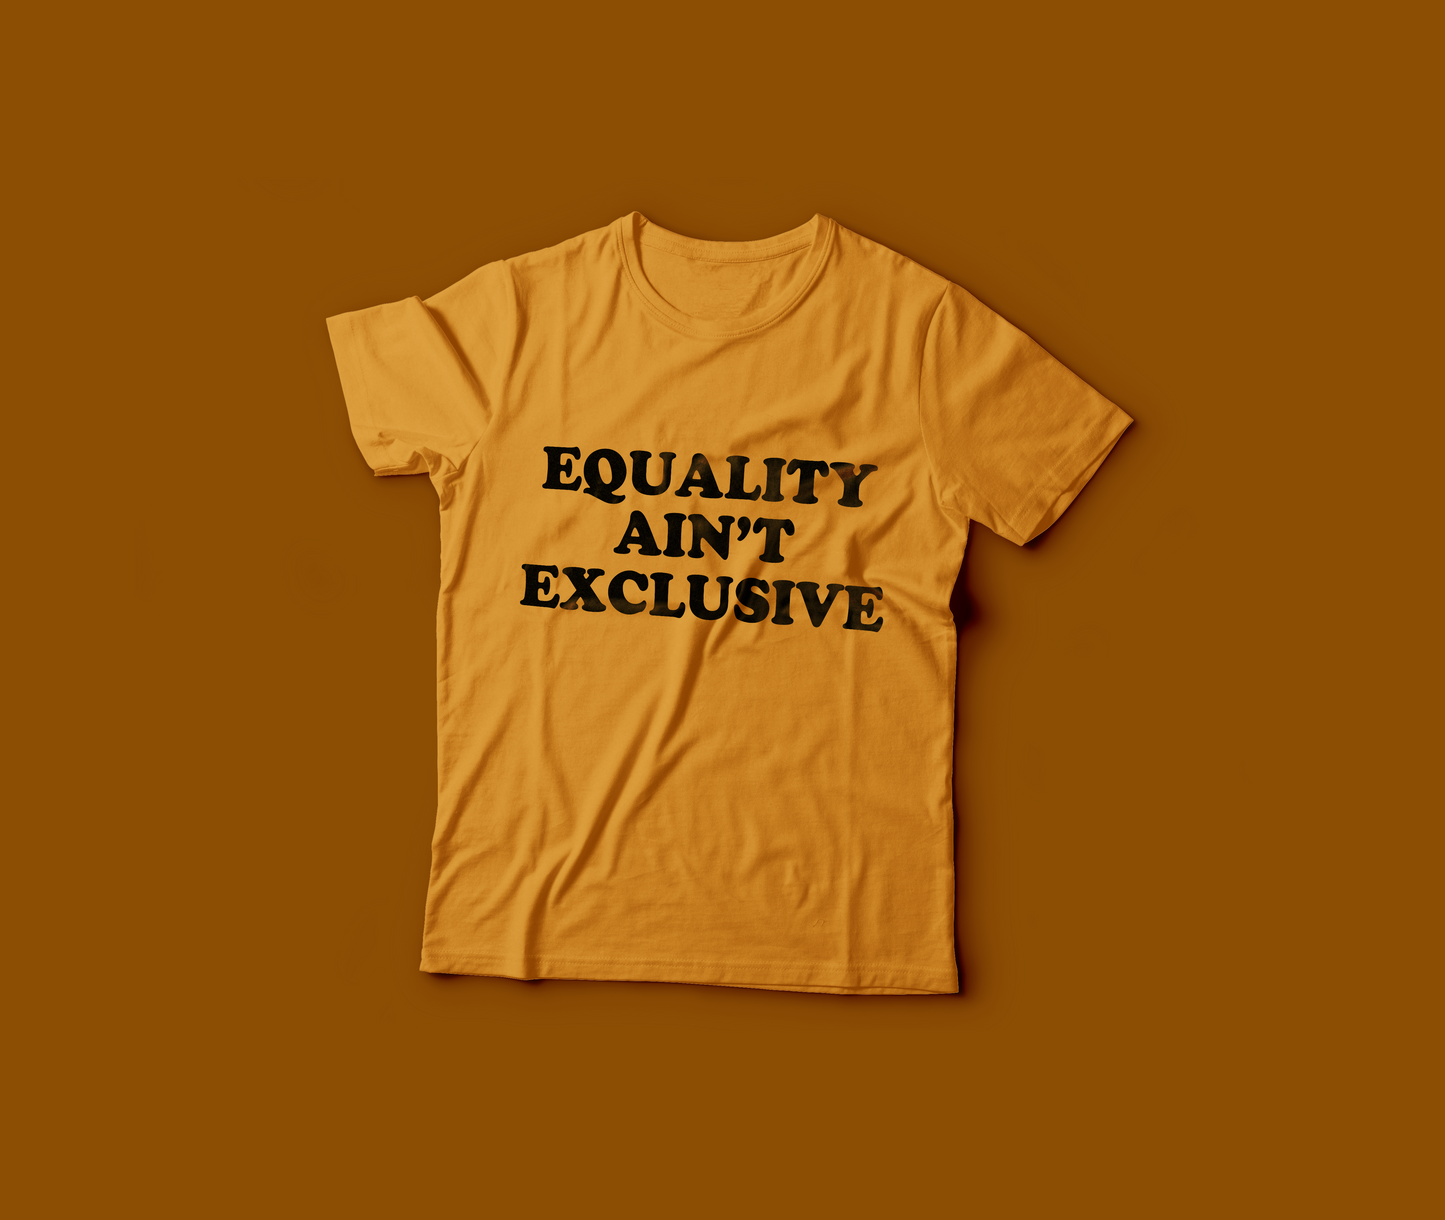 Equality Ain't Exclusive t-shirt - Brownie Points for You